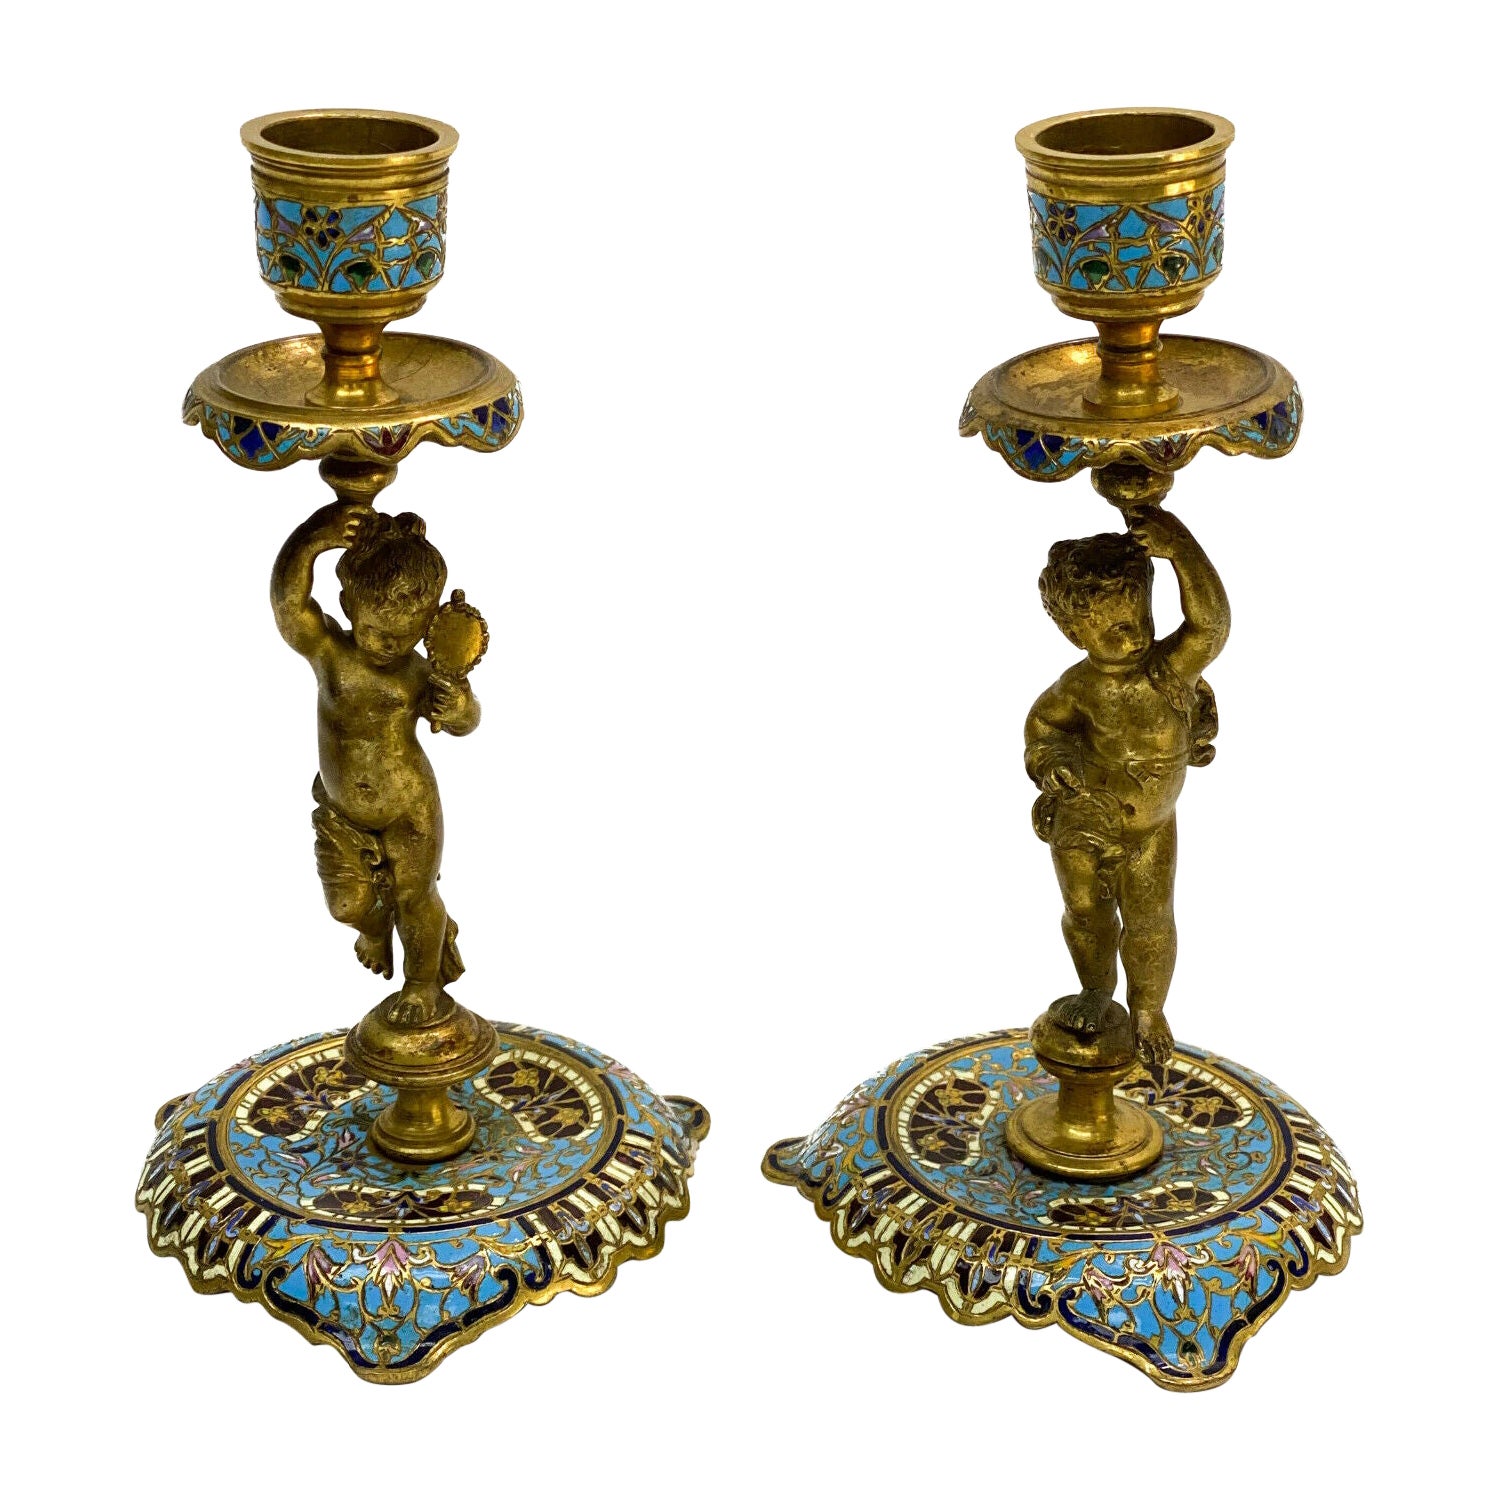 Pair of French Champleve Enamel Bronze Candlesticks, Late 19th Century